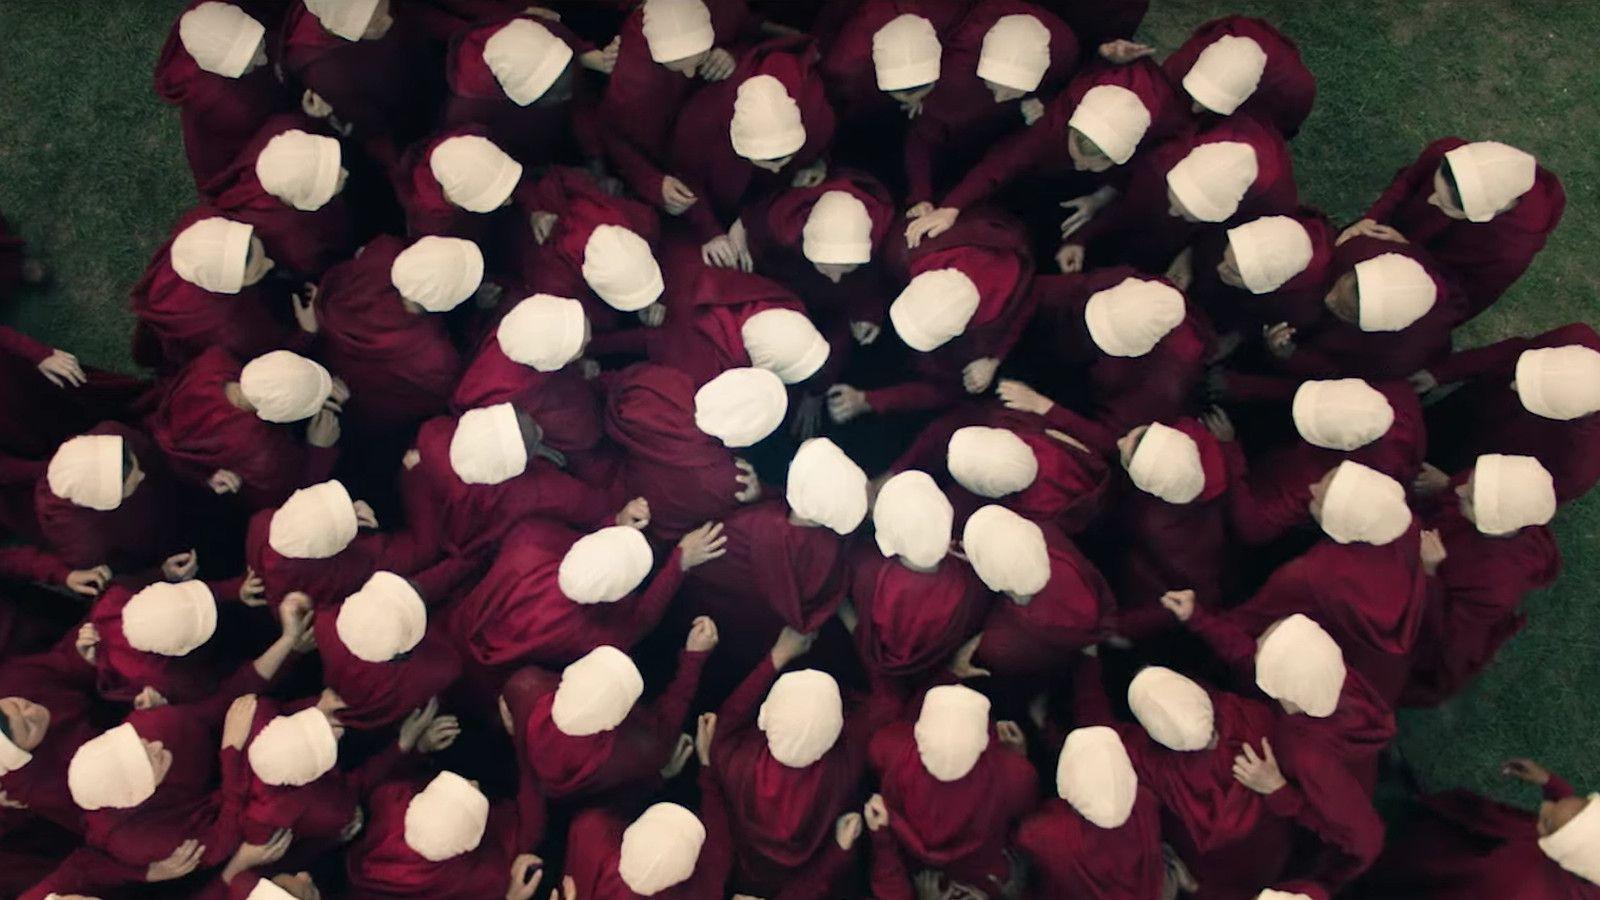 The full trailer for Hulu's Handmaid's Tale shows the rise of